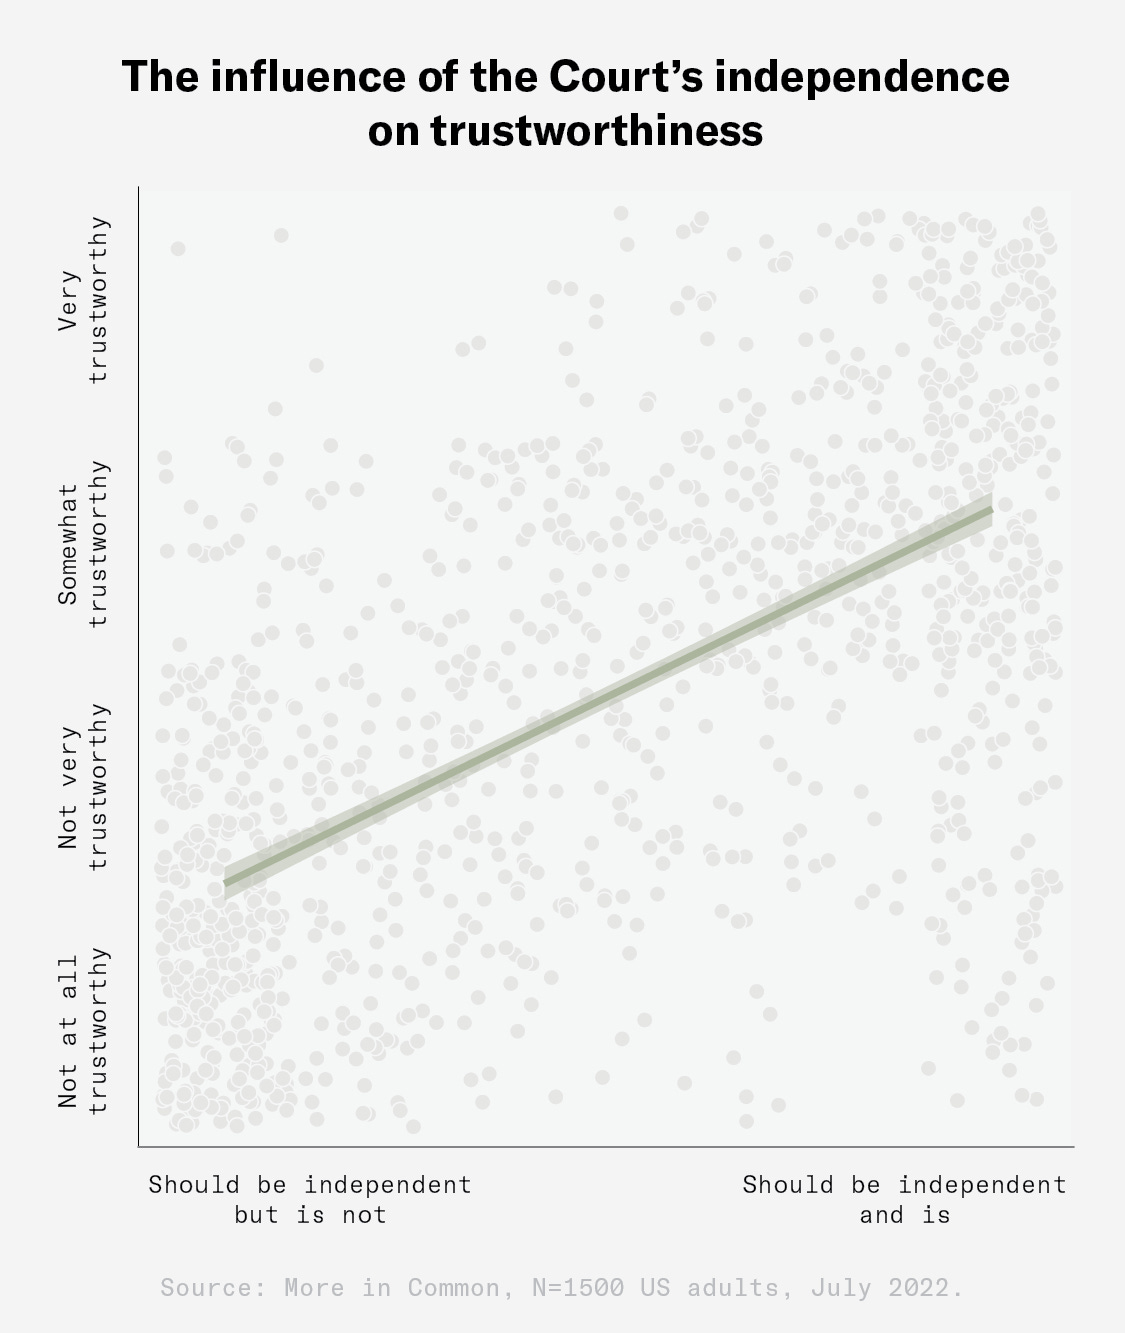 The influence of the Court's independence on trustworthiness. The graph shows a positive correlation. Source: More in Common, N=1500 US adults, July 2022.